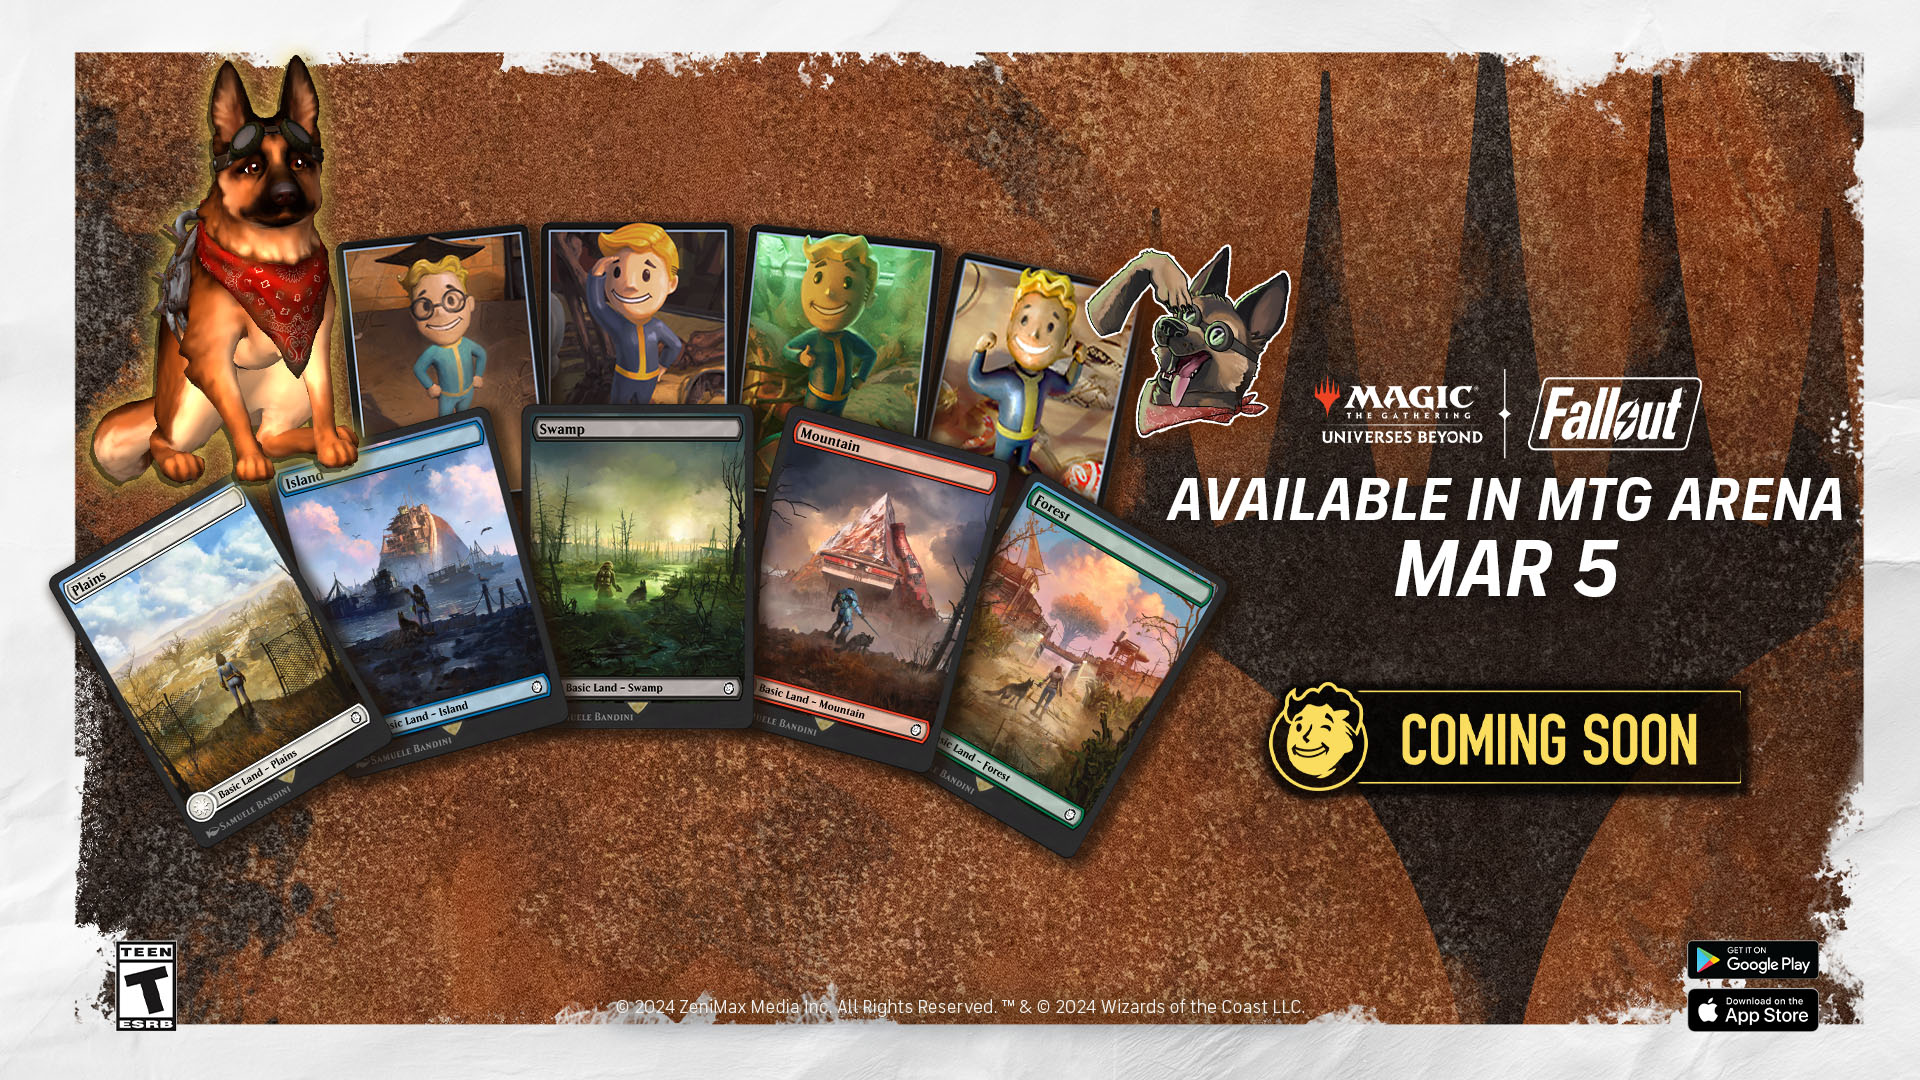 Magic: The Gathering – Fallout cosmetics, available March 5